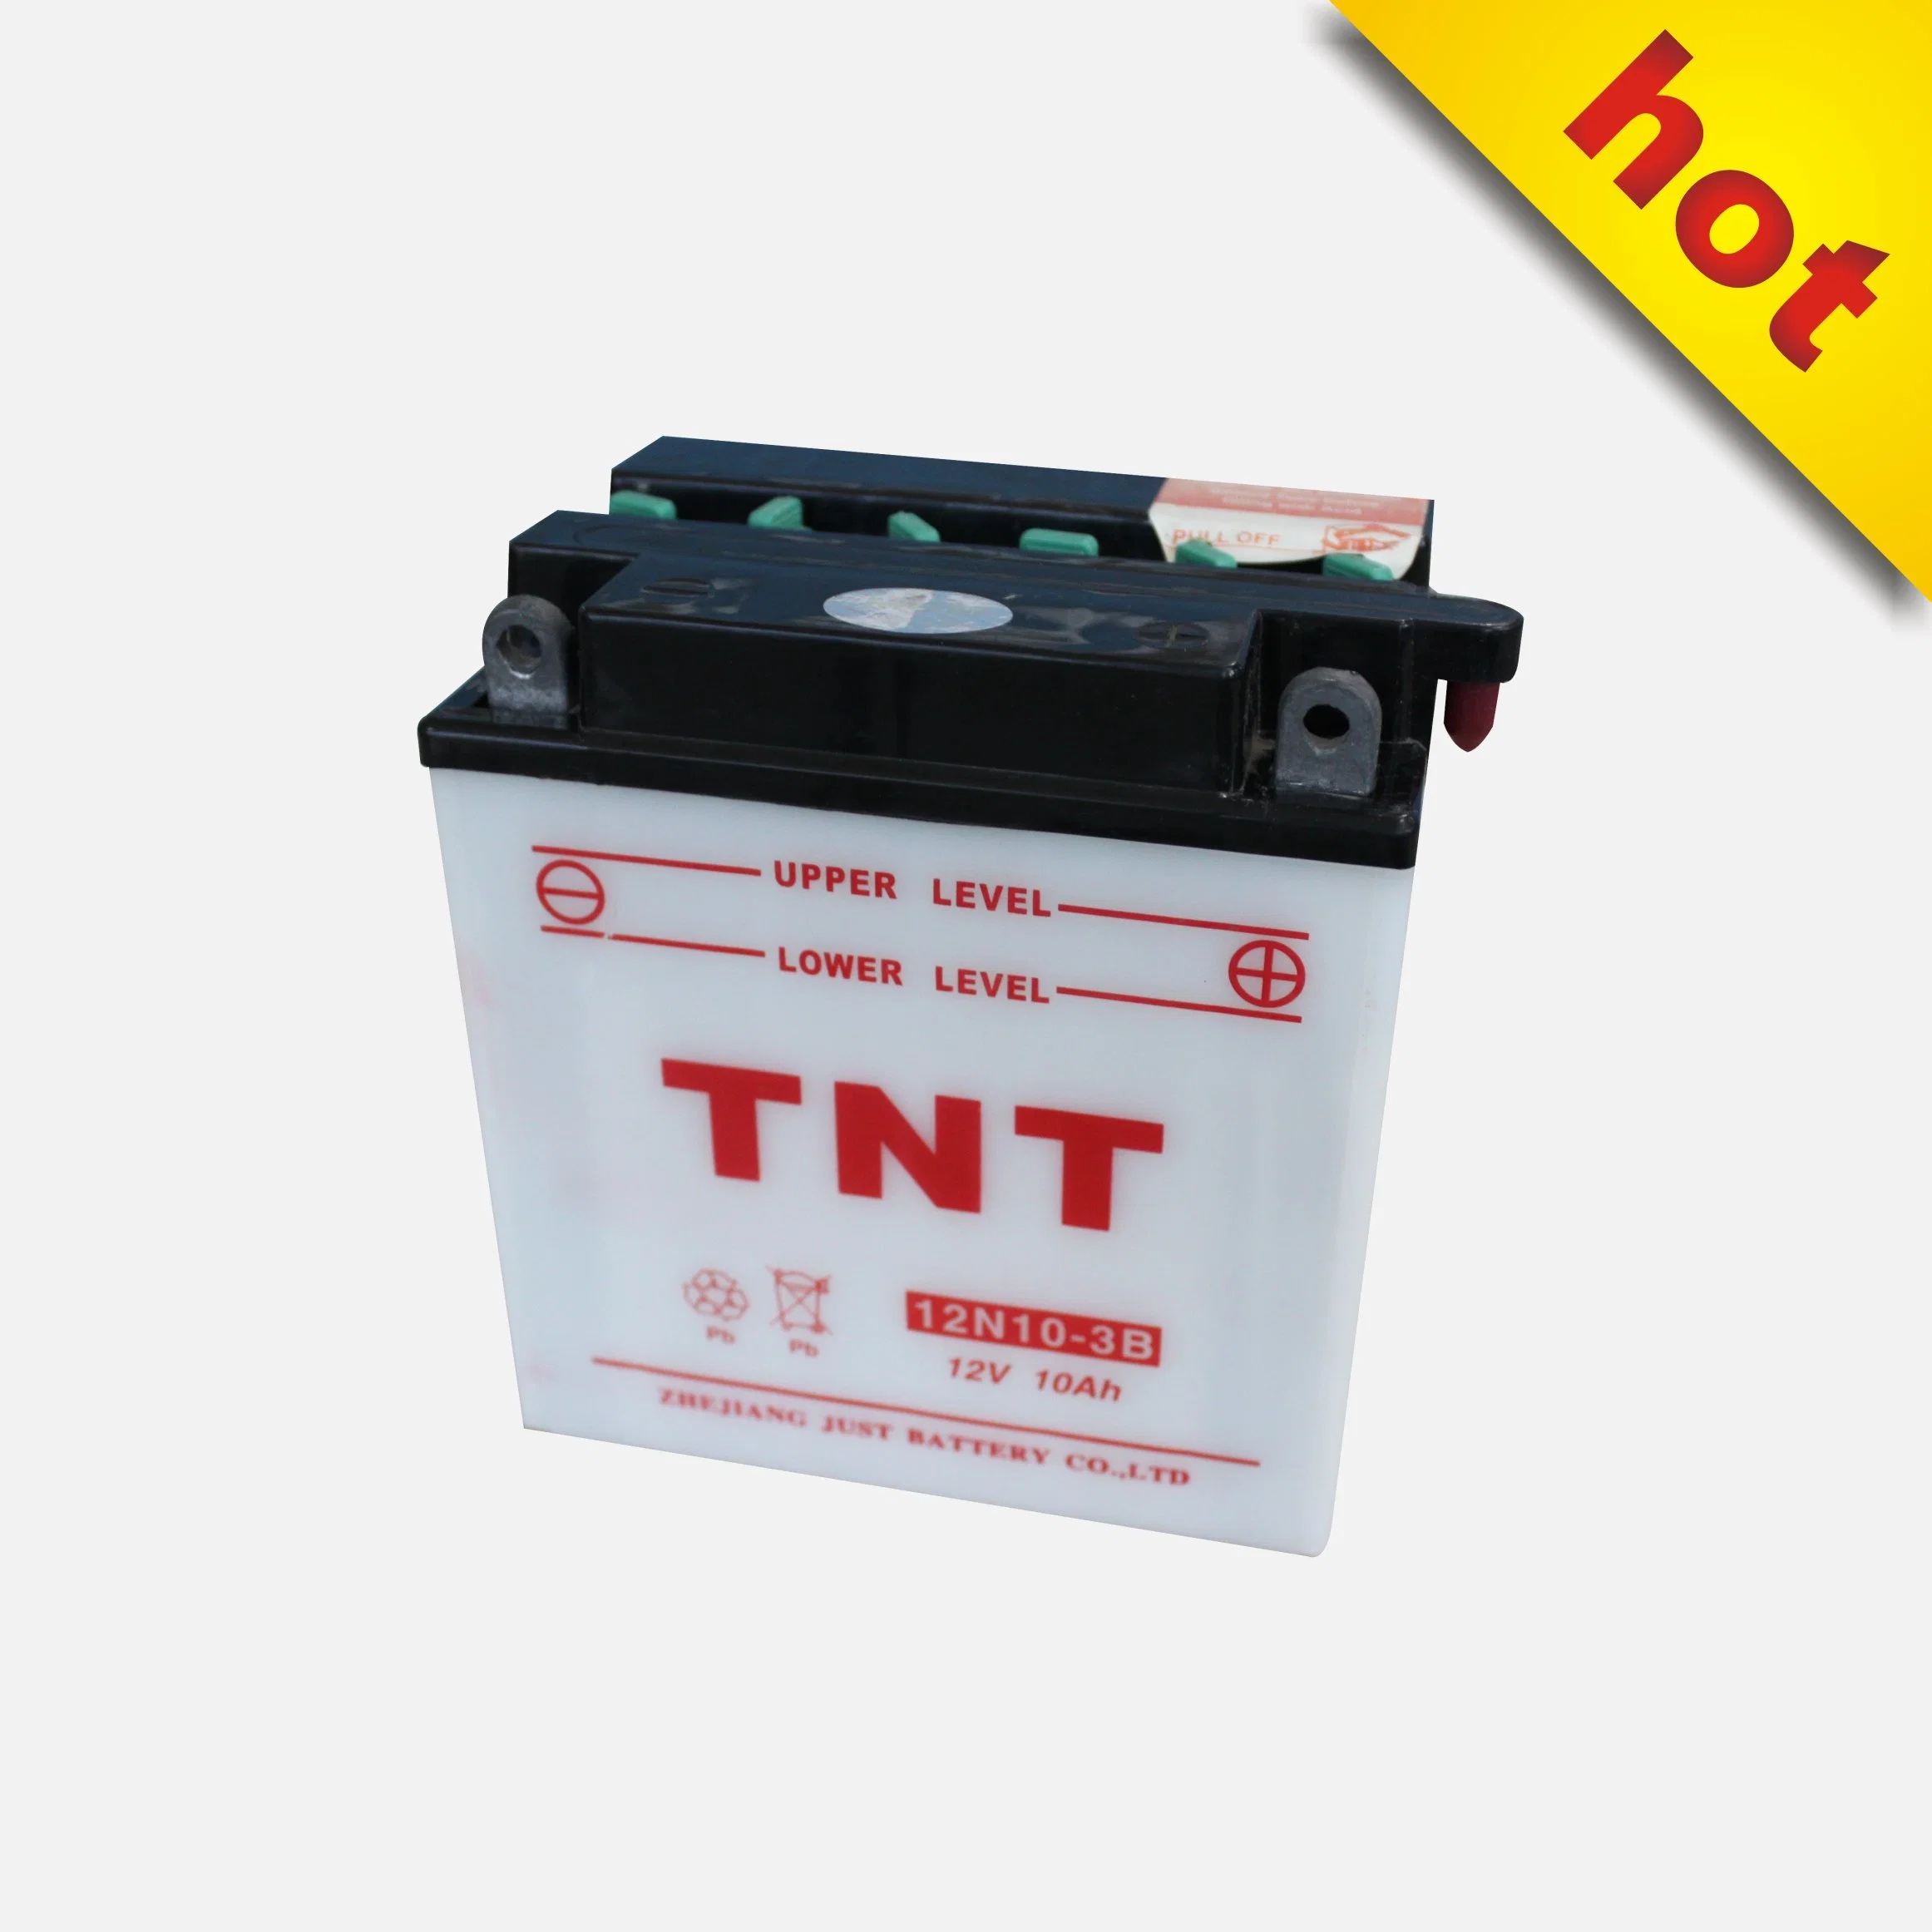 12n10-B2 Dry Charged Battery Acid Battery Motorcycle Battery